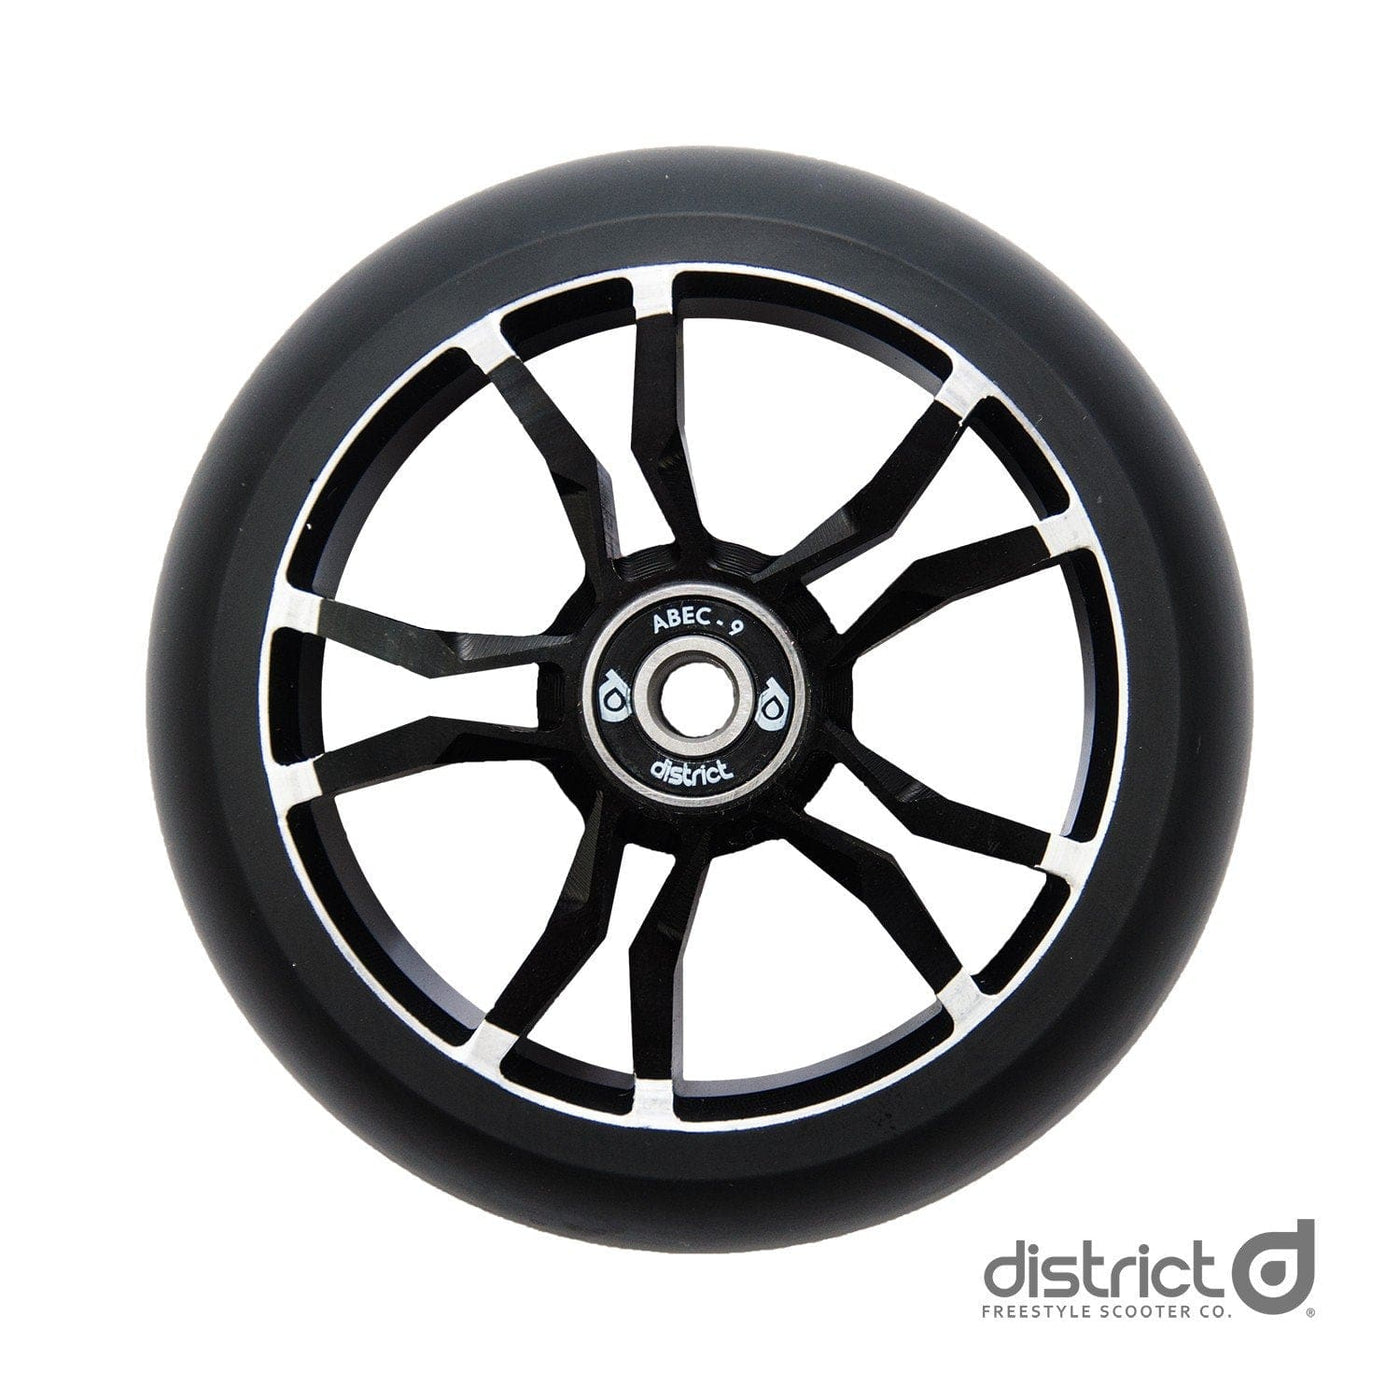 District Scooters 110mmx30mm LM110 Wide Milled Core Wheel - Black / Black District